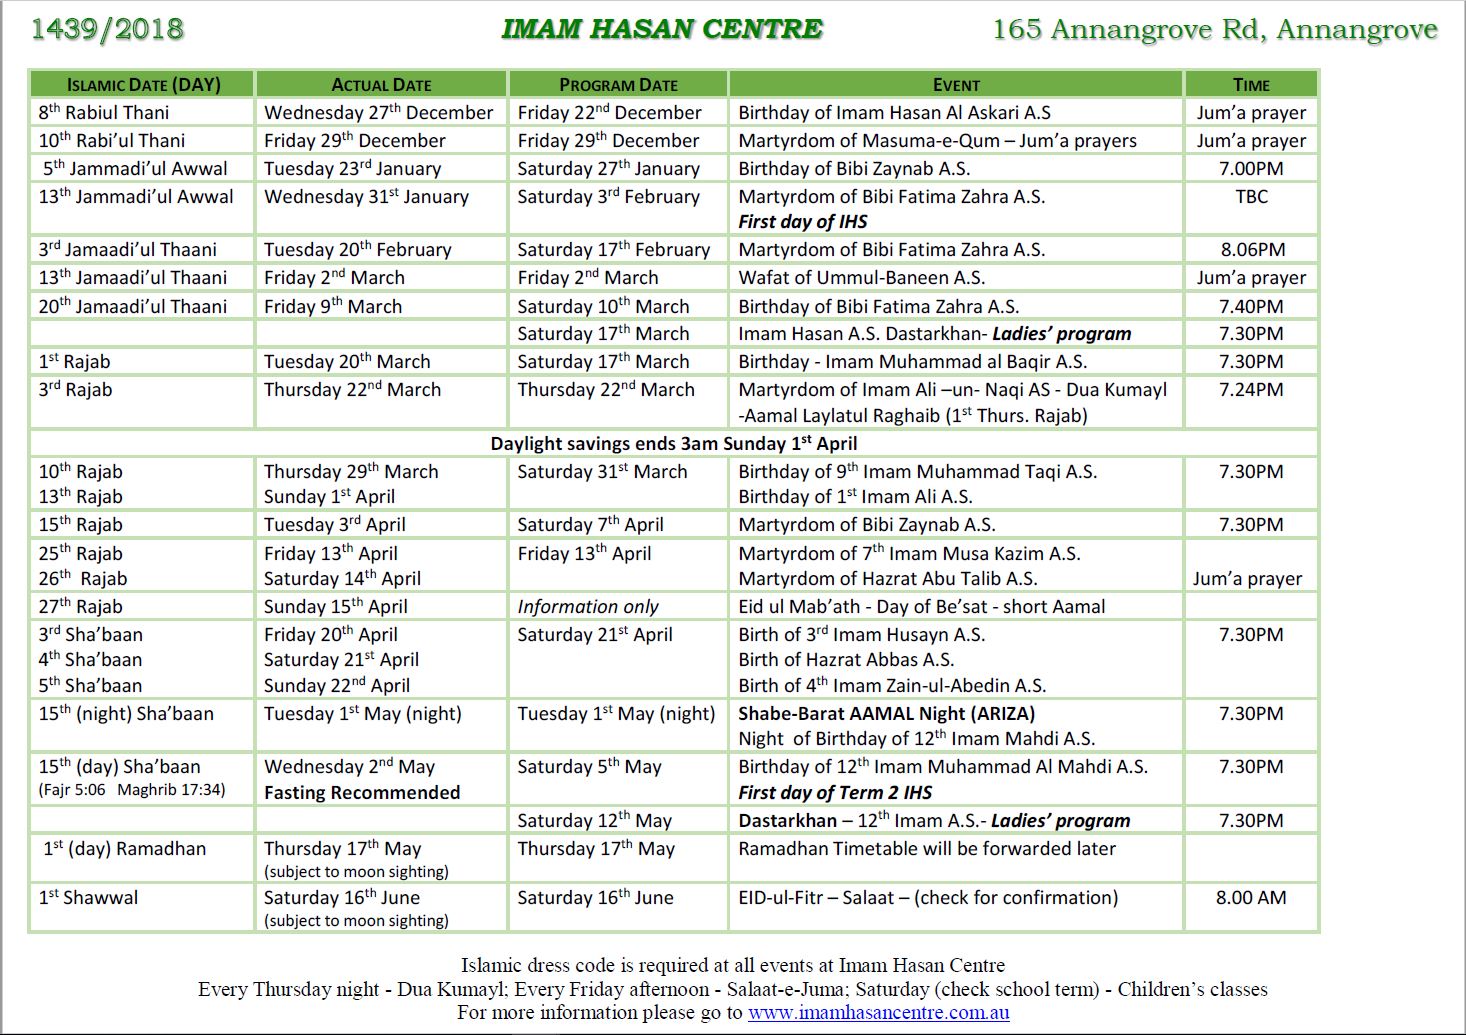 This Week at IHC – Celebrating the Birthday of our 11th Imam – Jum’a Prayers